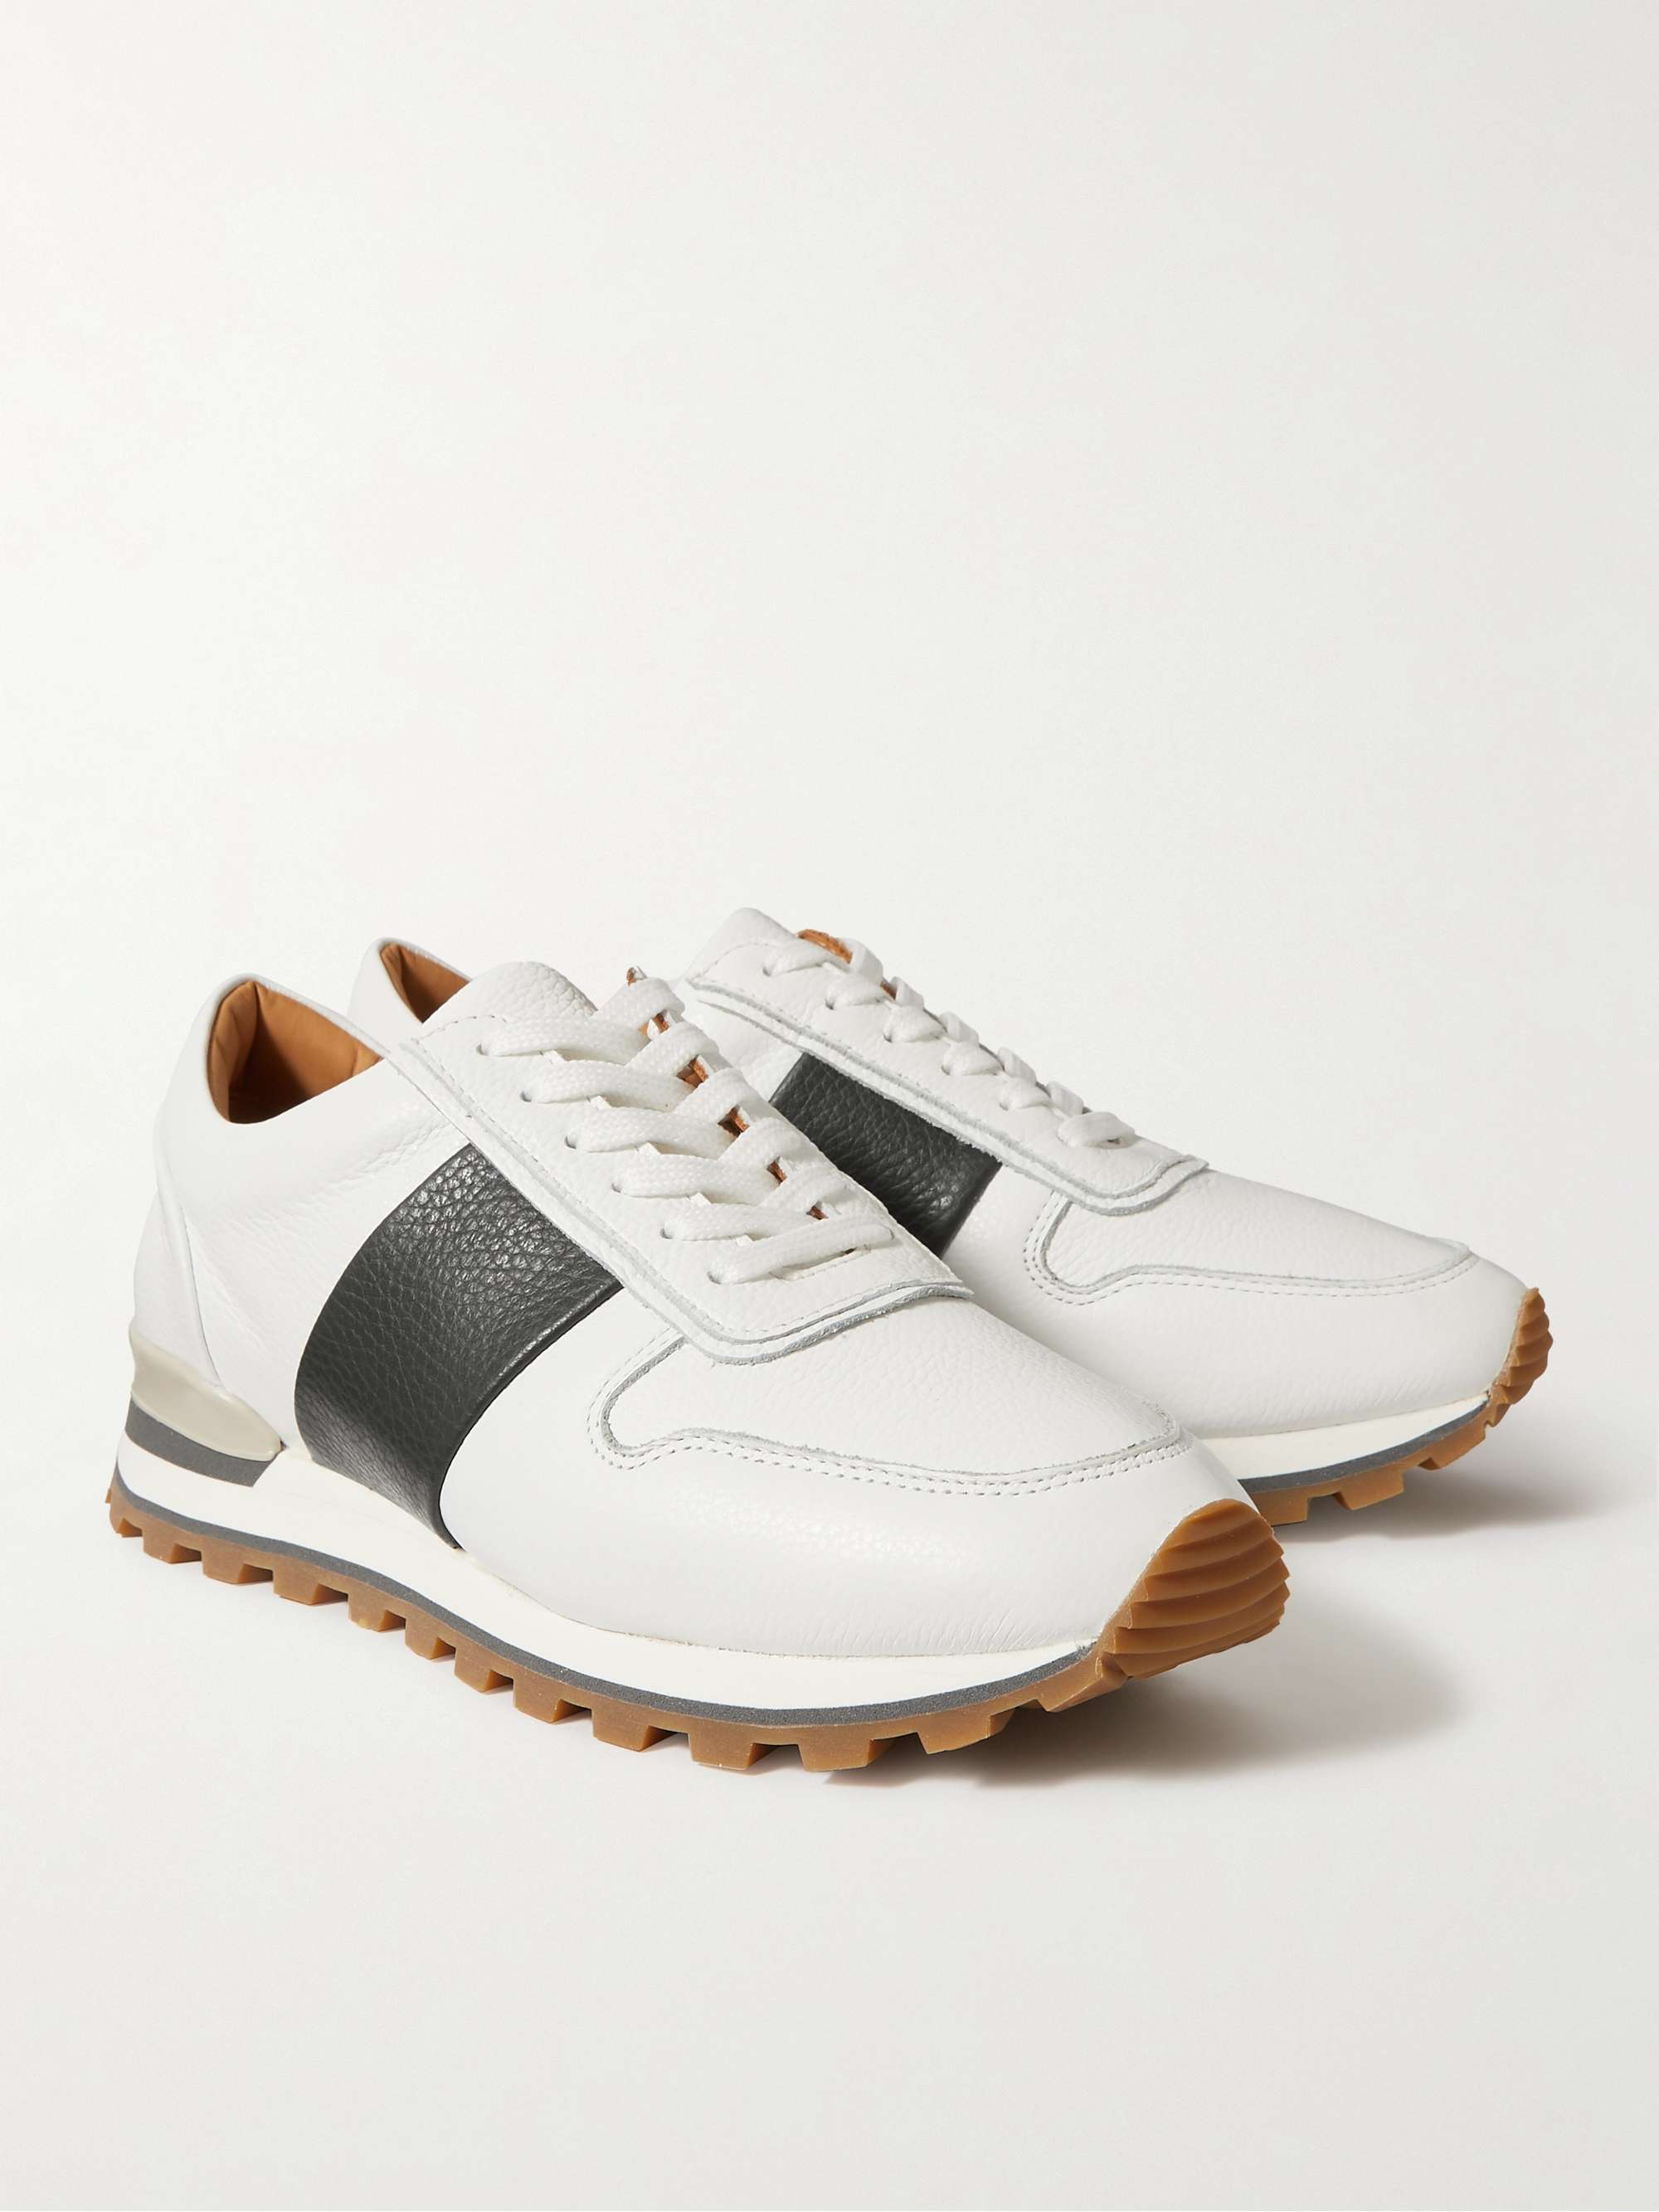 MR P. Panelled Full-Grain Leather Sneakers